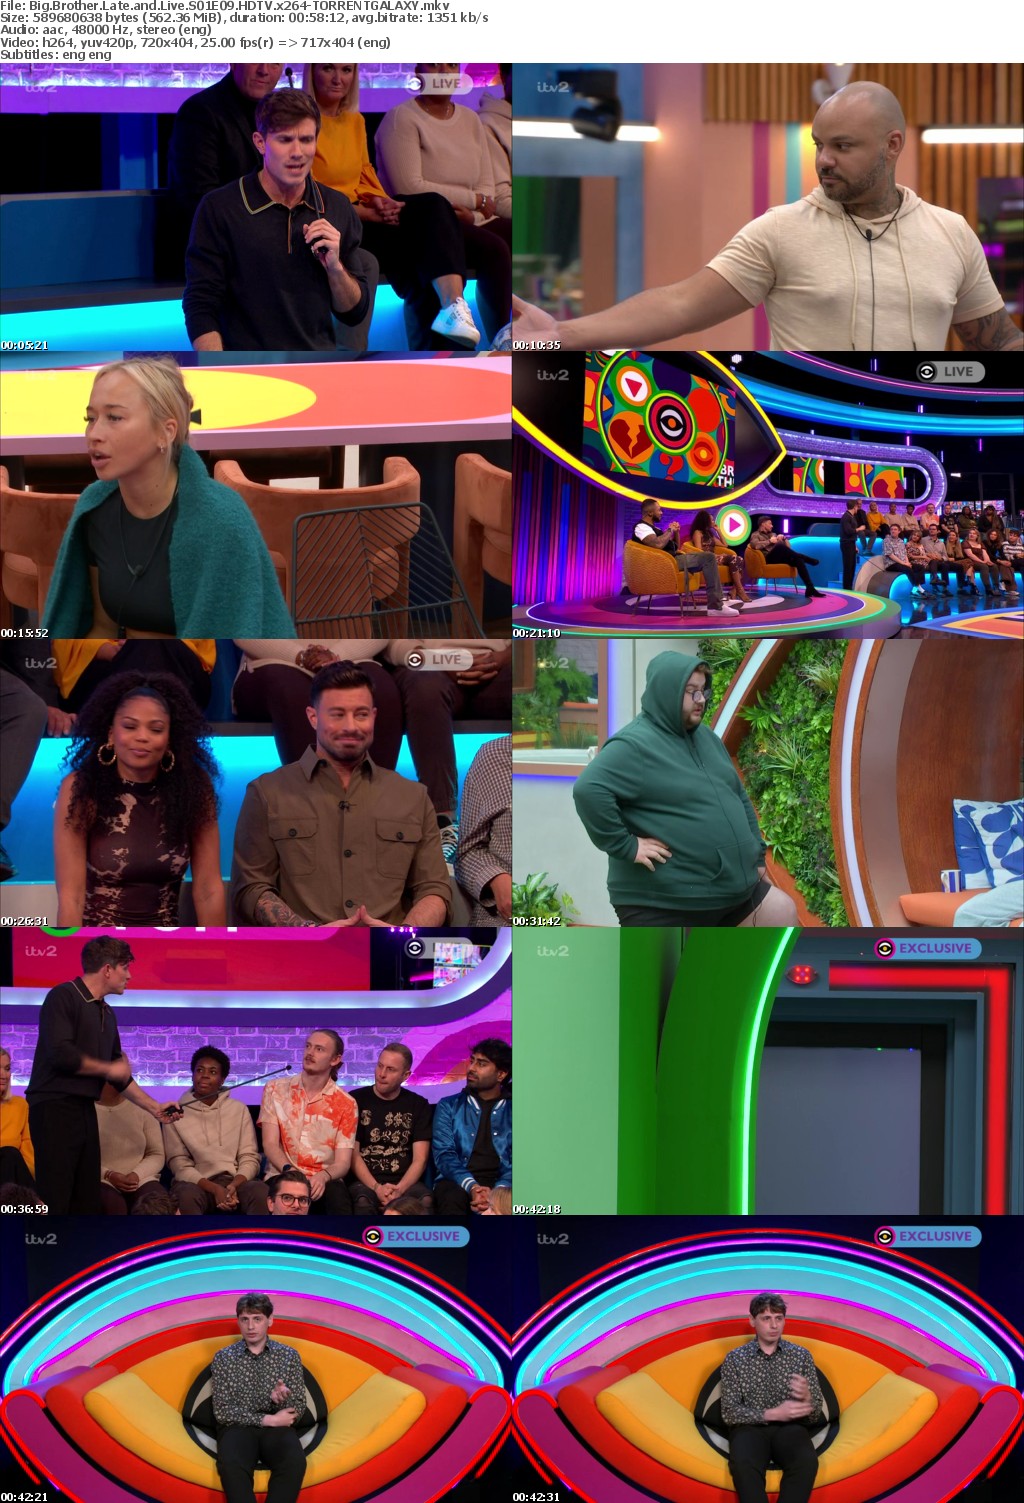 Big Brother Late and Live S01E09 HDTV x264-GALAXY